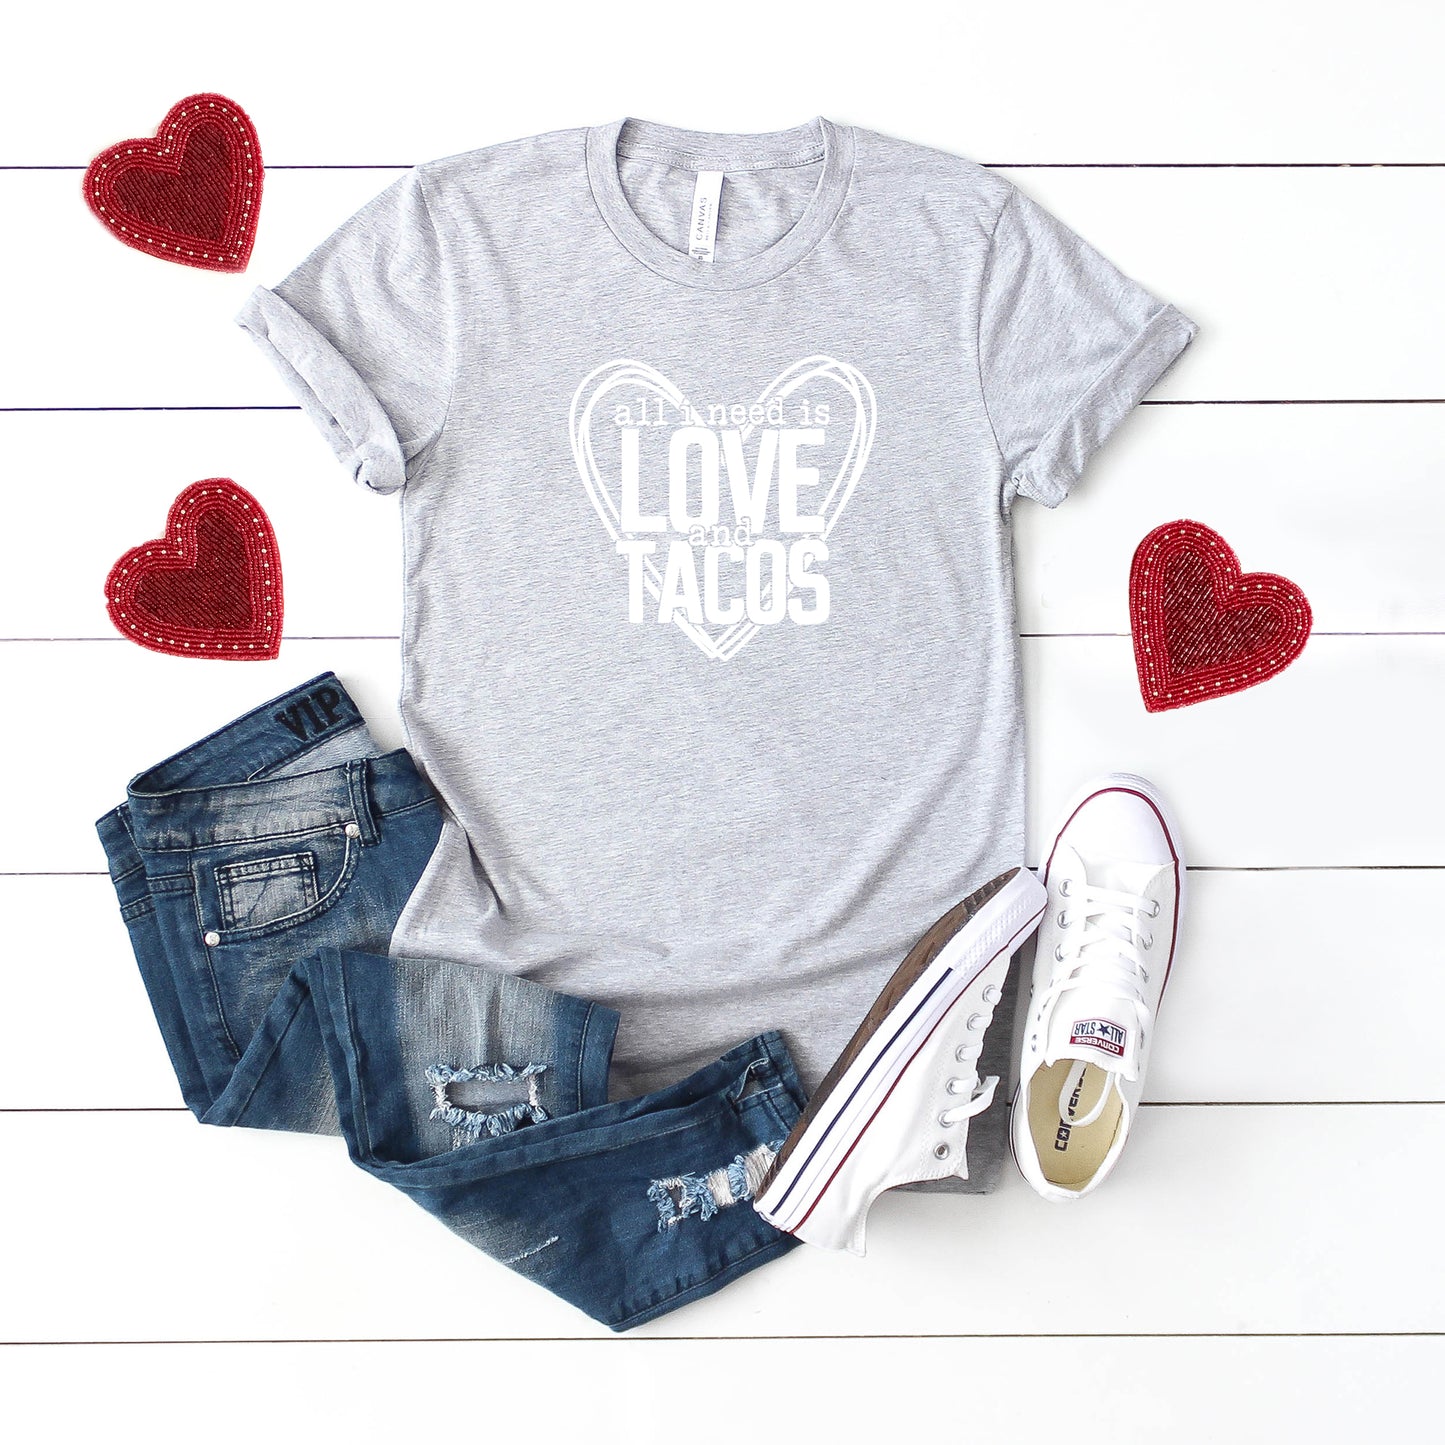 All You Need Is Love And Tacos | Short Sleeve Graphic Tee